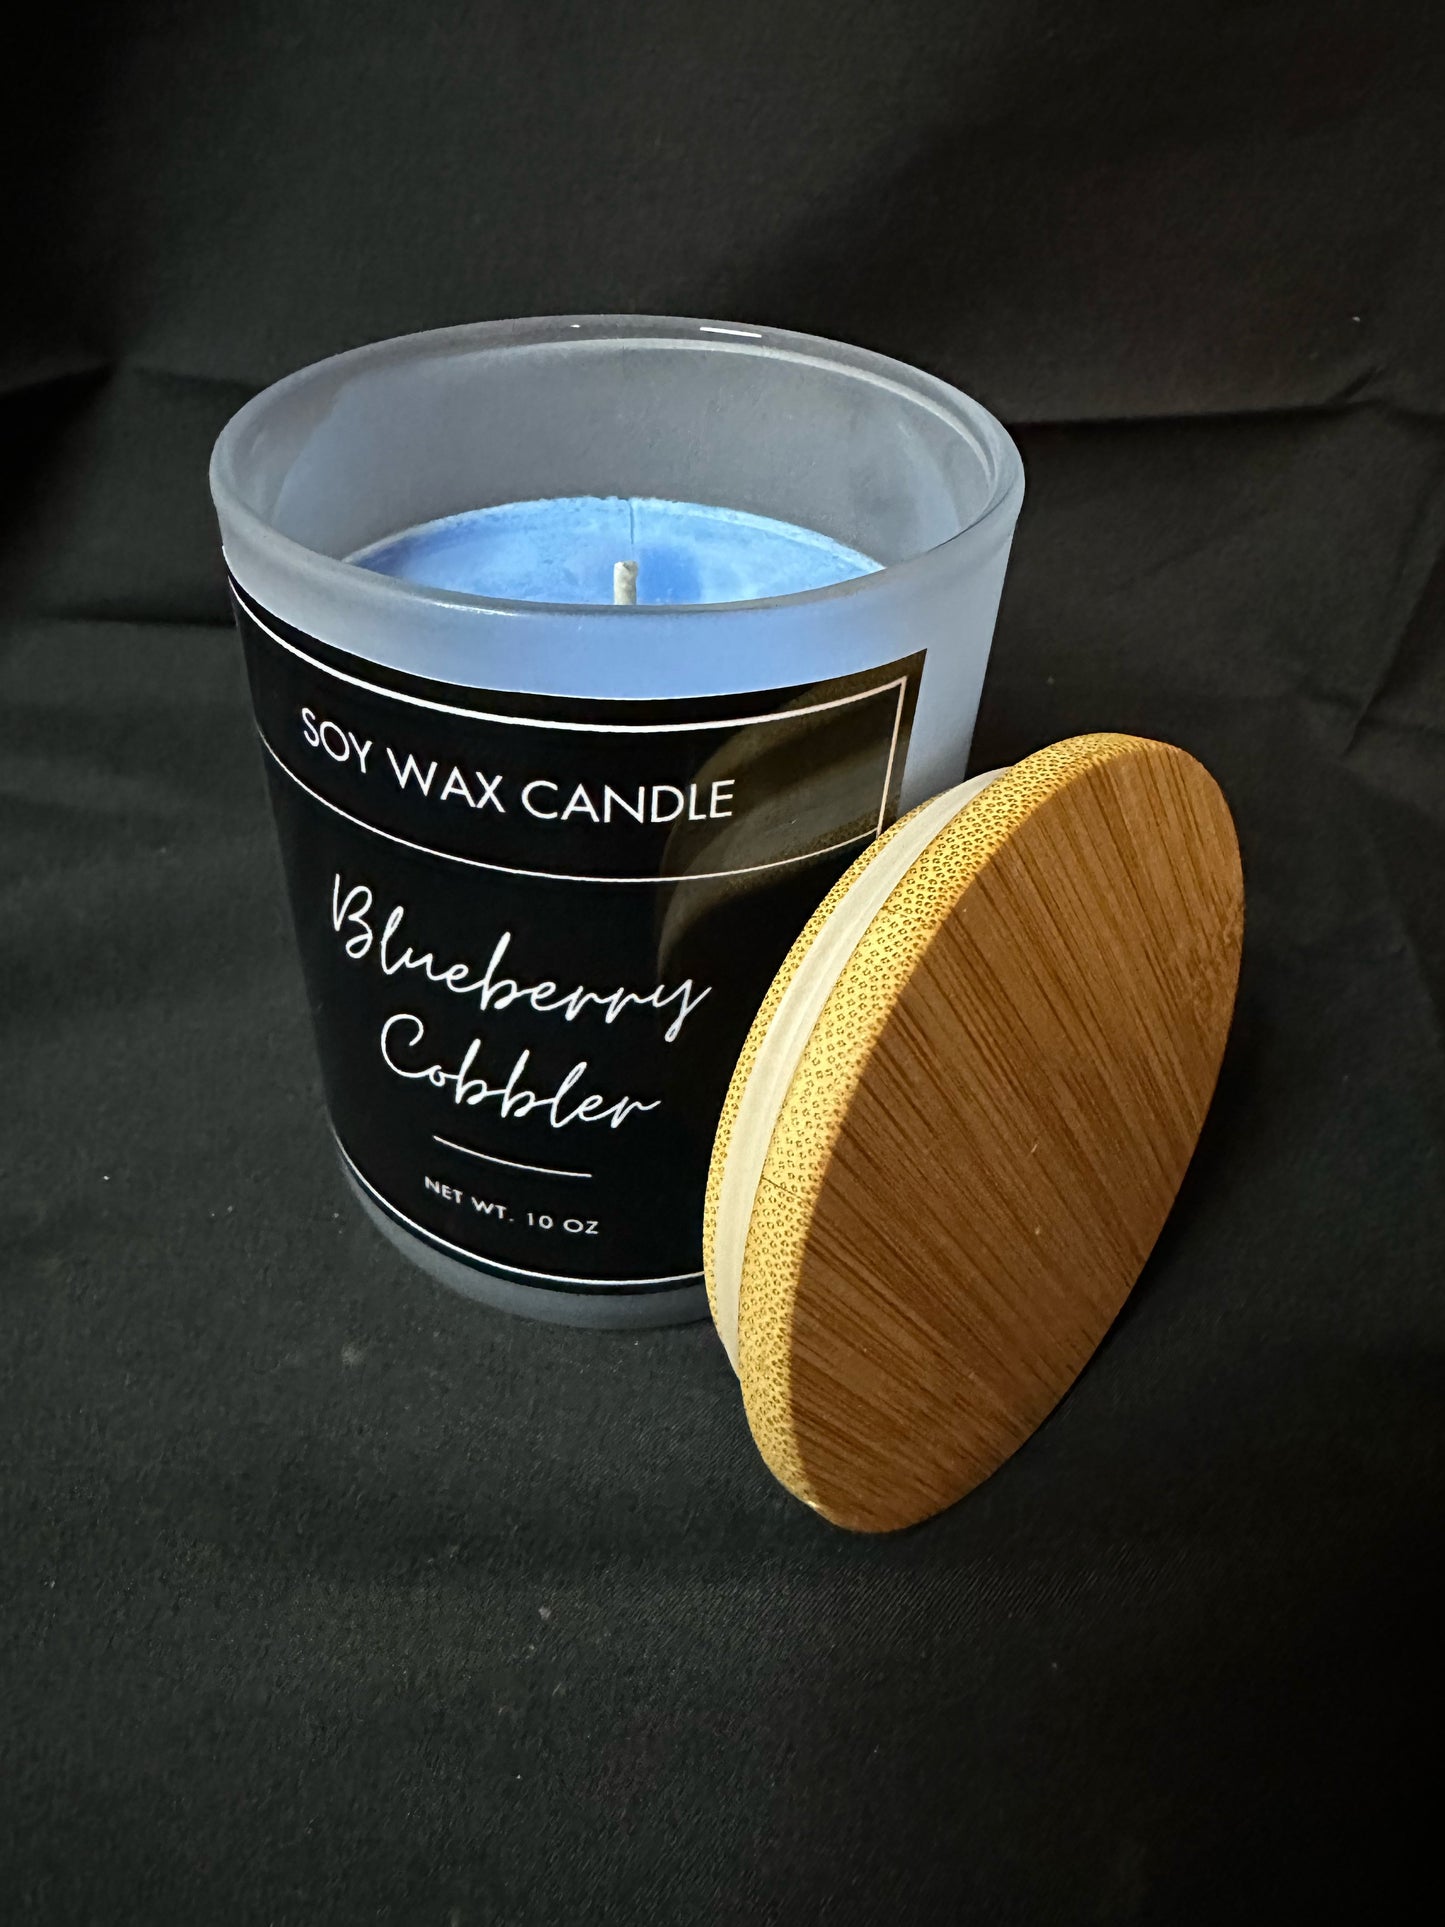 Blueberry Cobbler candle